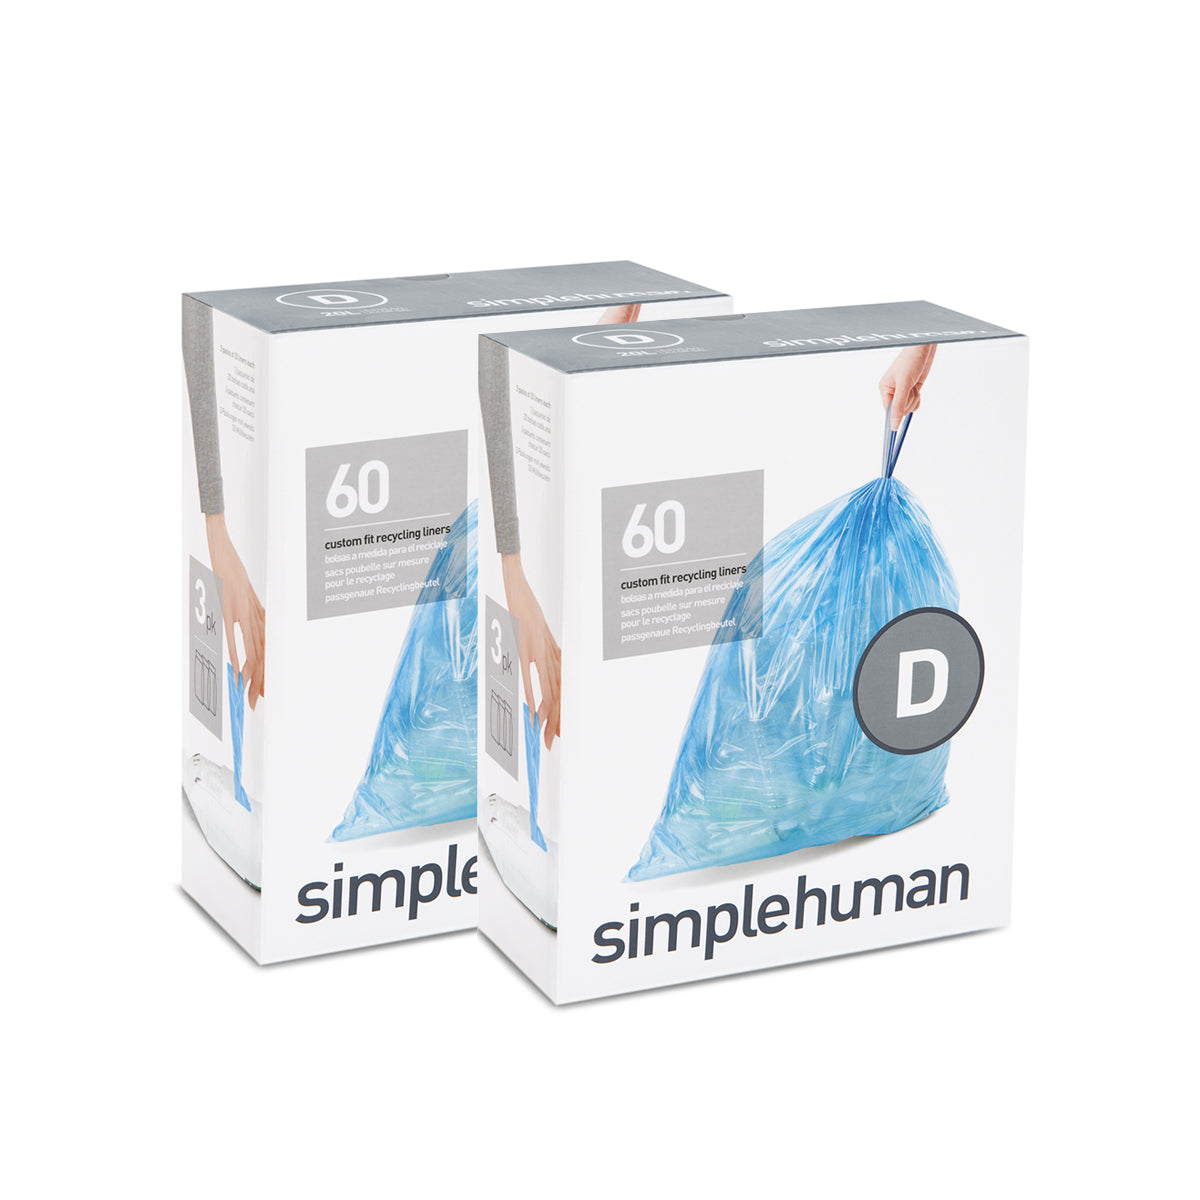 Plasticplace simplehuman (X) Code D Compatible (100 Count) Blue Recycling Bags 5.3 Gallon / 20 Liter 15.75 x 28